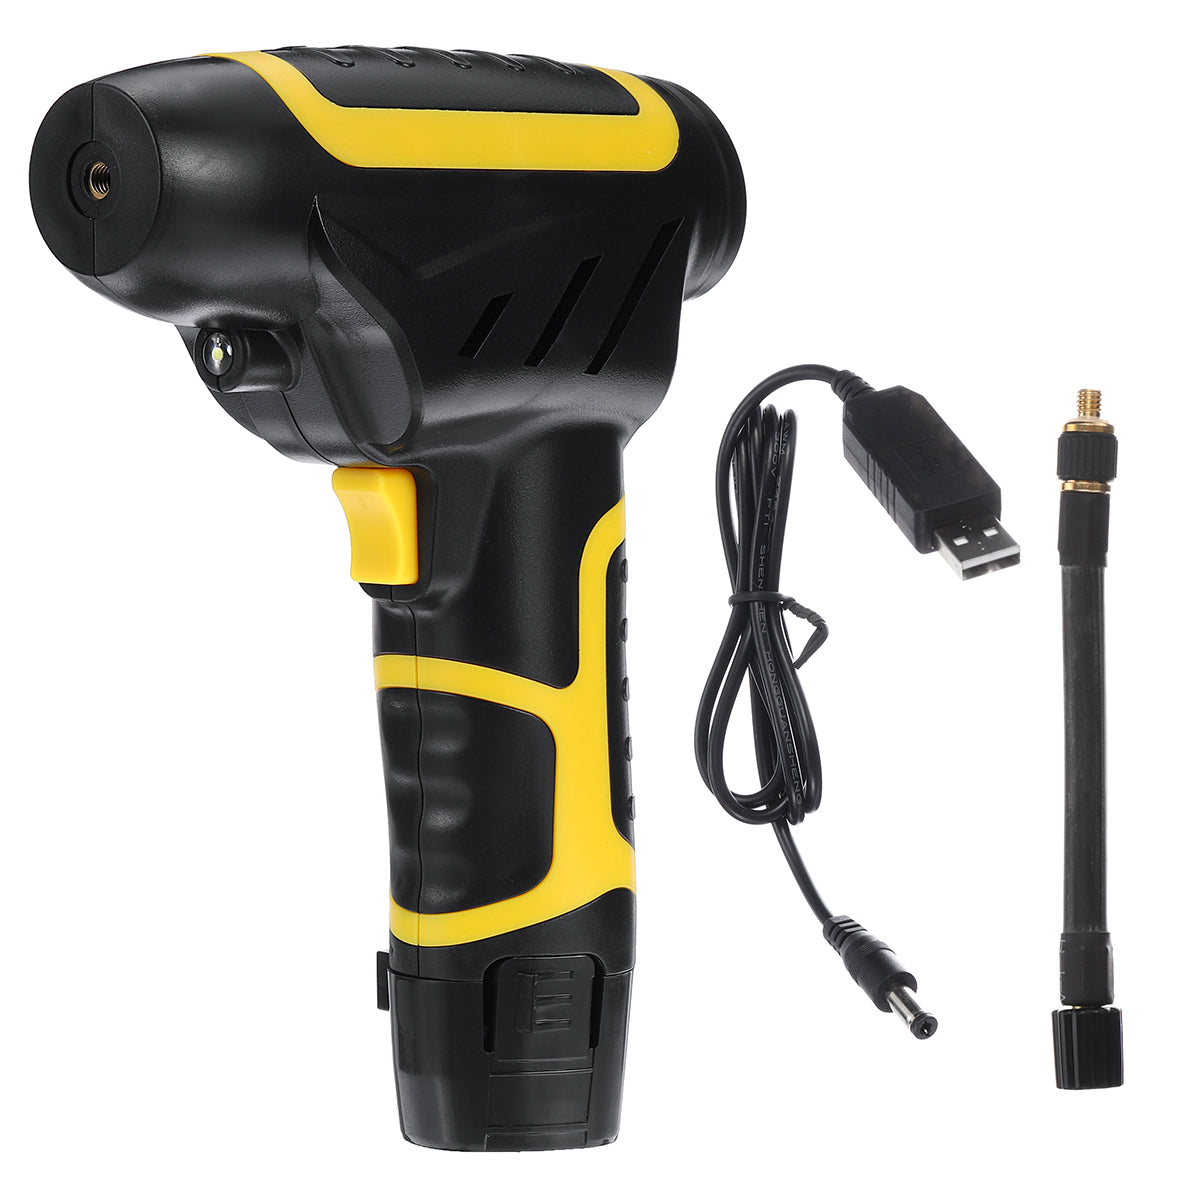 Goldenrod 120W Cordless Handheld Inflatable Air Pump Car Tyre Inflator LCD Display